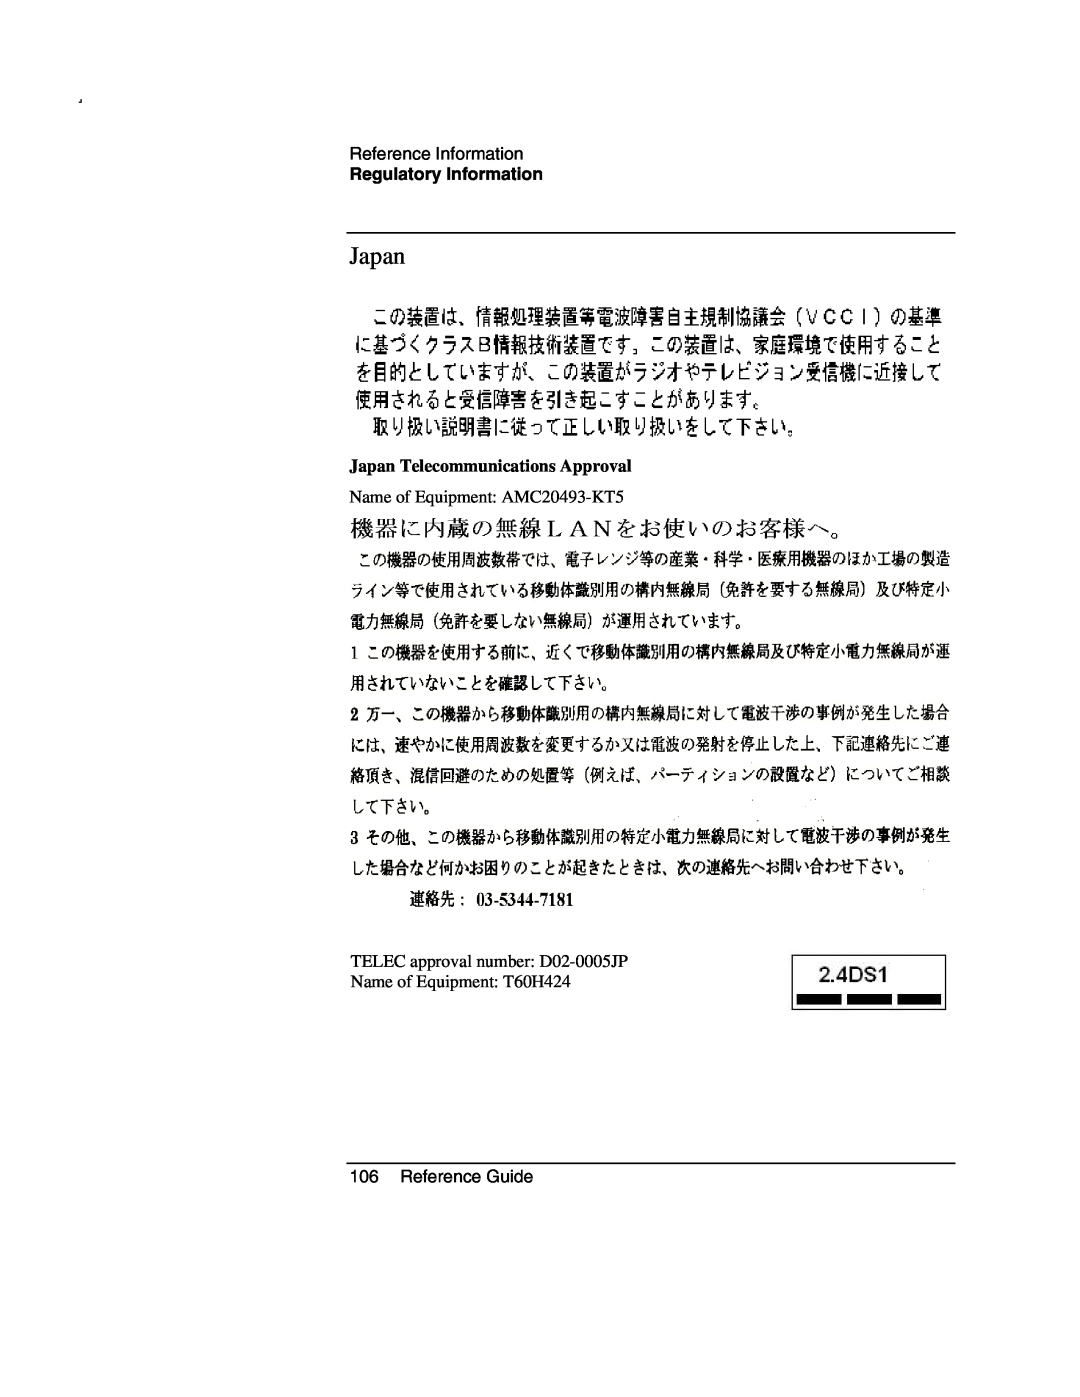 Compaq AMC20493-KT5 Japan Telecommunications Approval, Reference Guide, Reference Information, Regulatory Information 